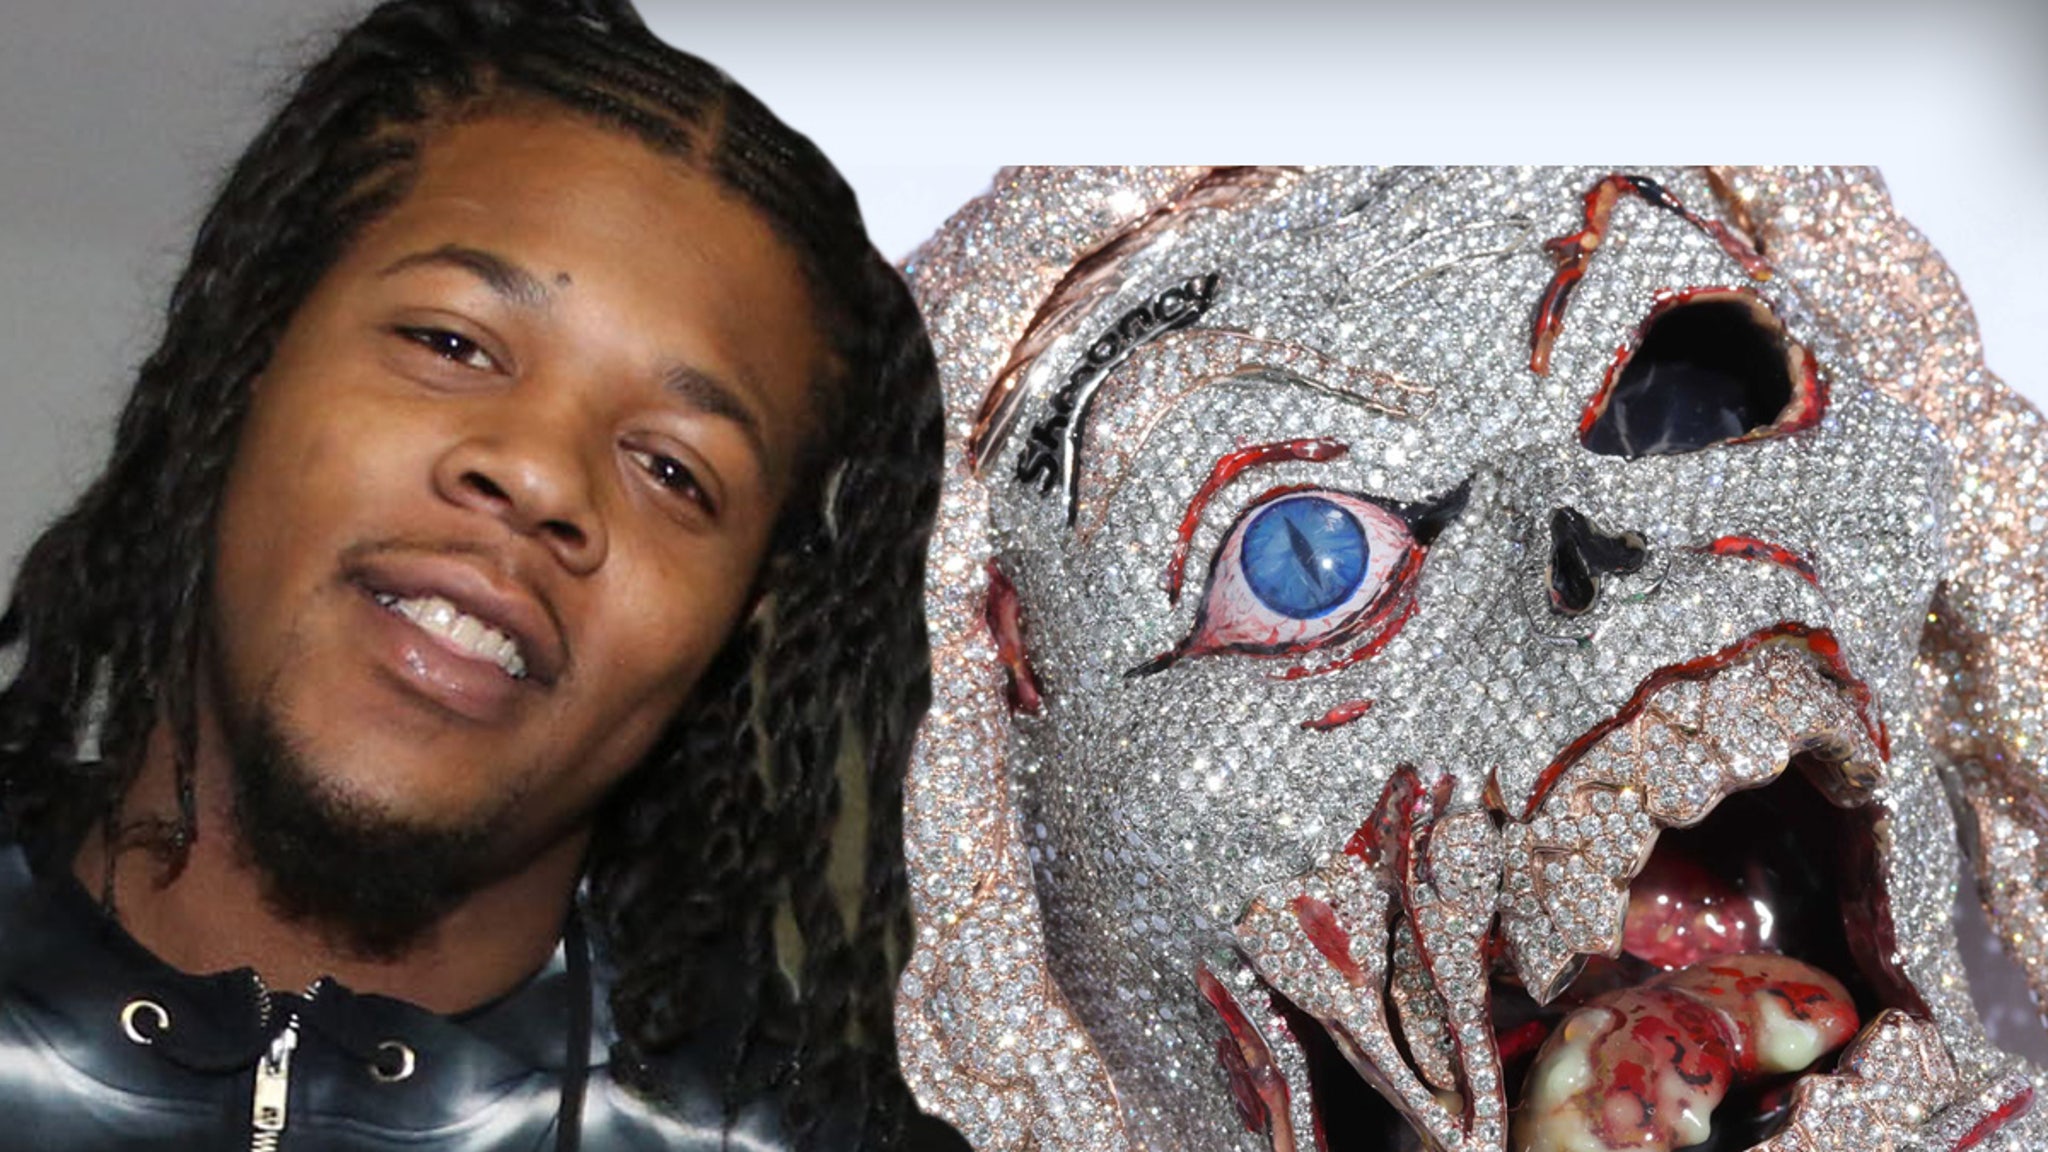 Rowdy Rebel Blinging straight from prison, buy a $ 100,000 chain of demons